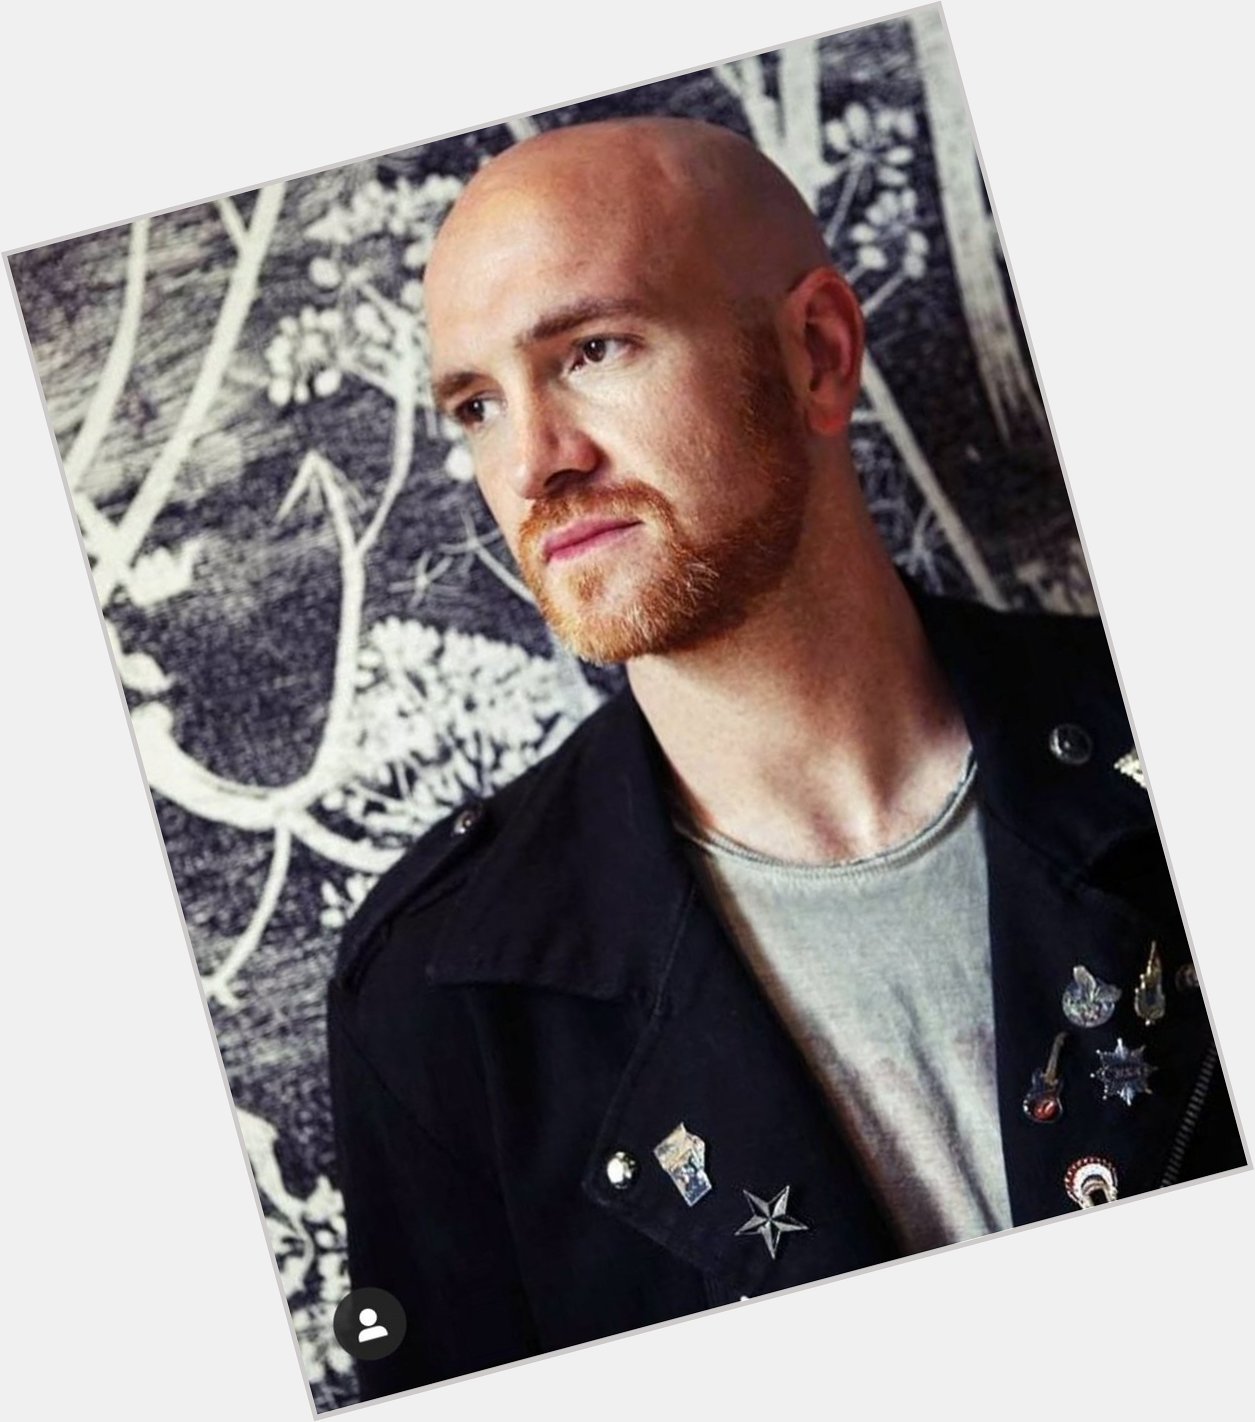  Awww happy  birthday mark sheehan  you total LEGEND  hope you have a great day     